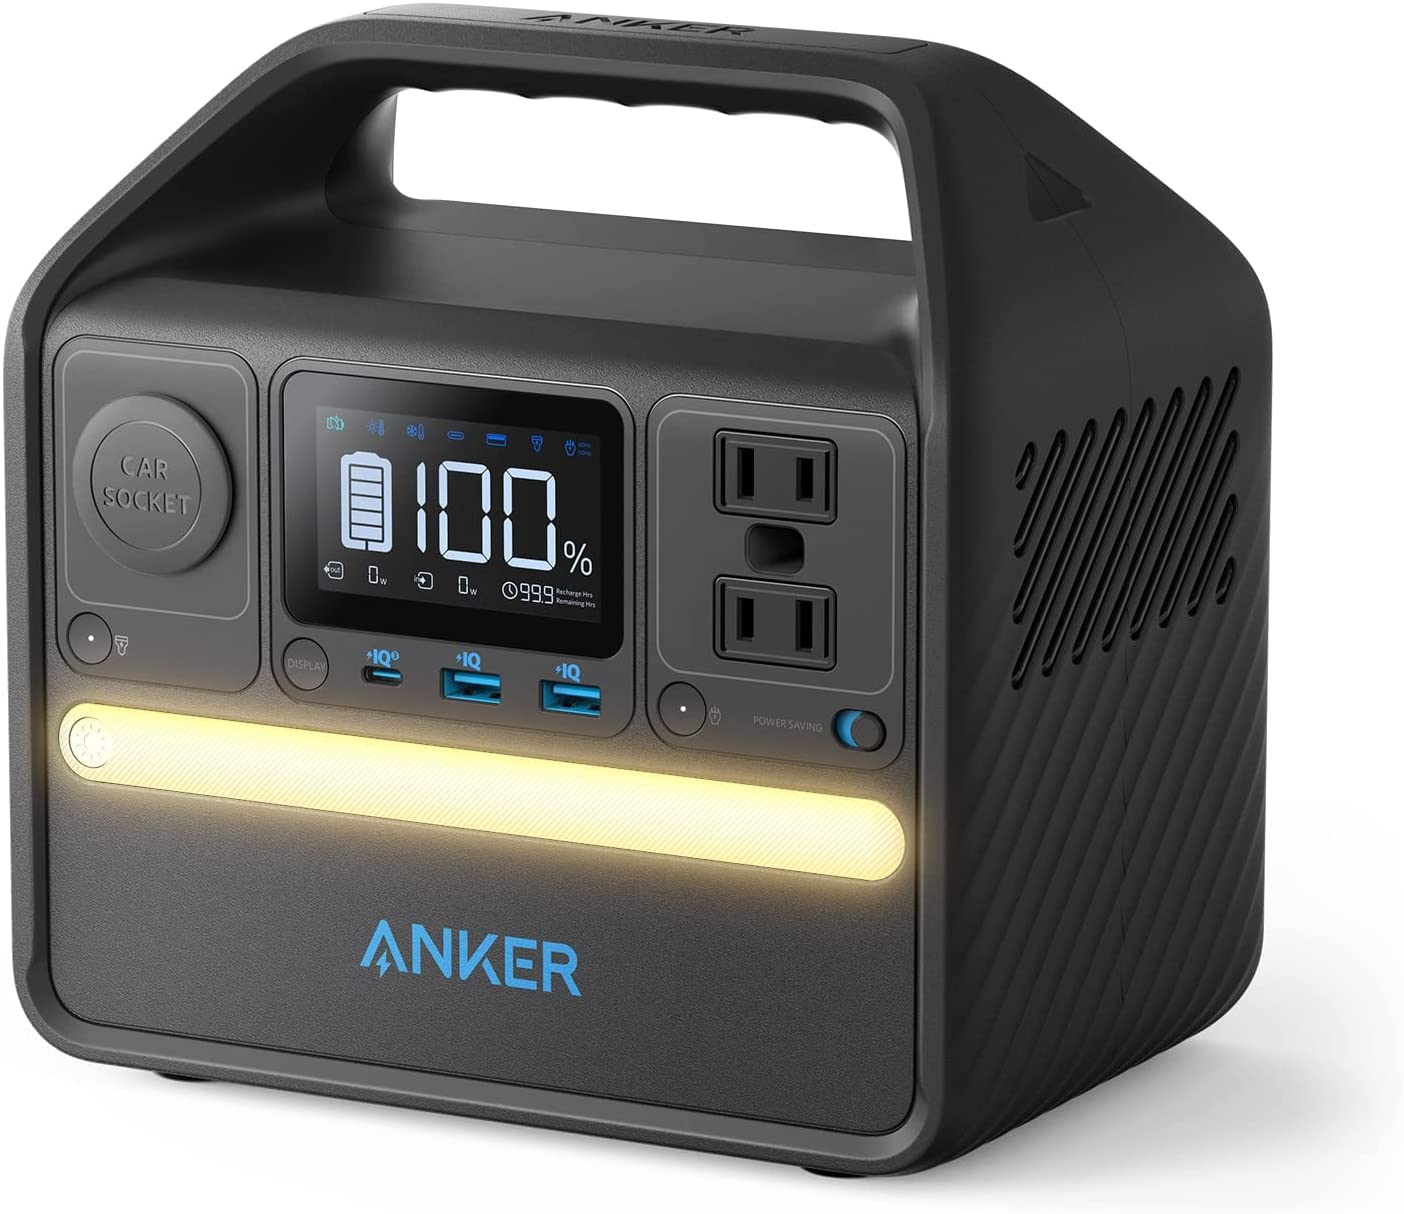 Anker Portable Generator 256Wh, 521 Portable Power Station 200W $189.99